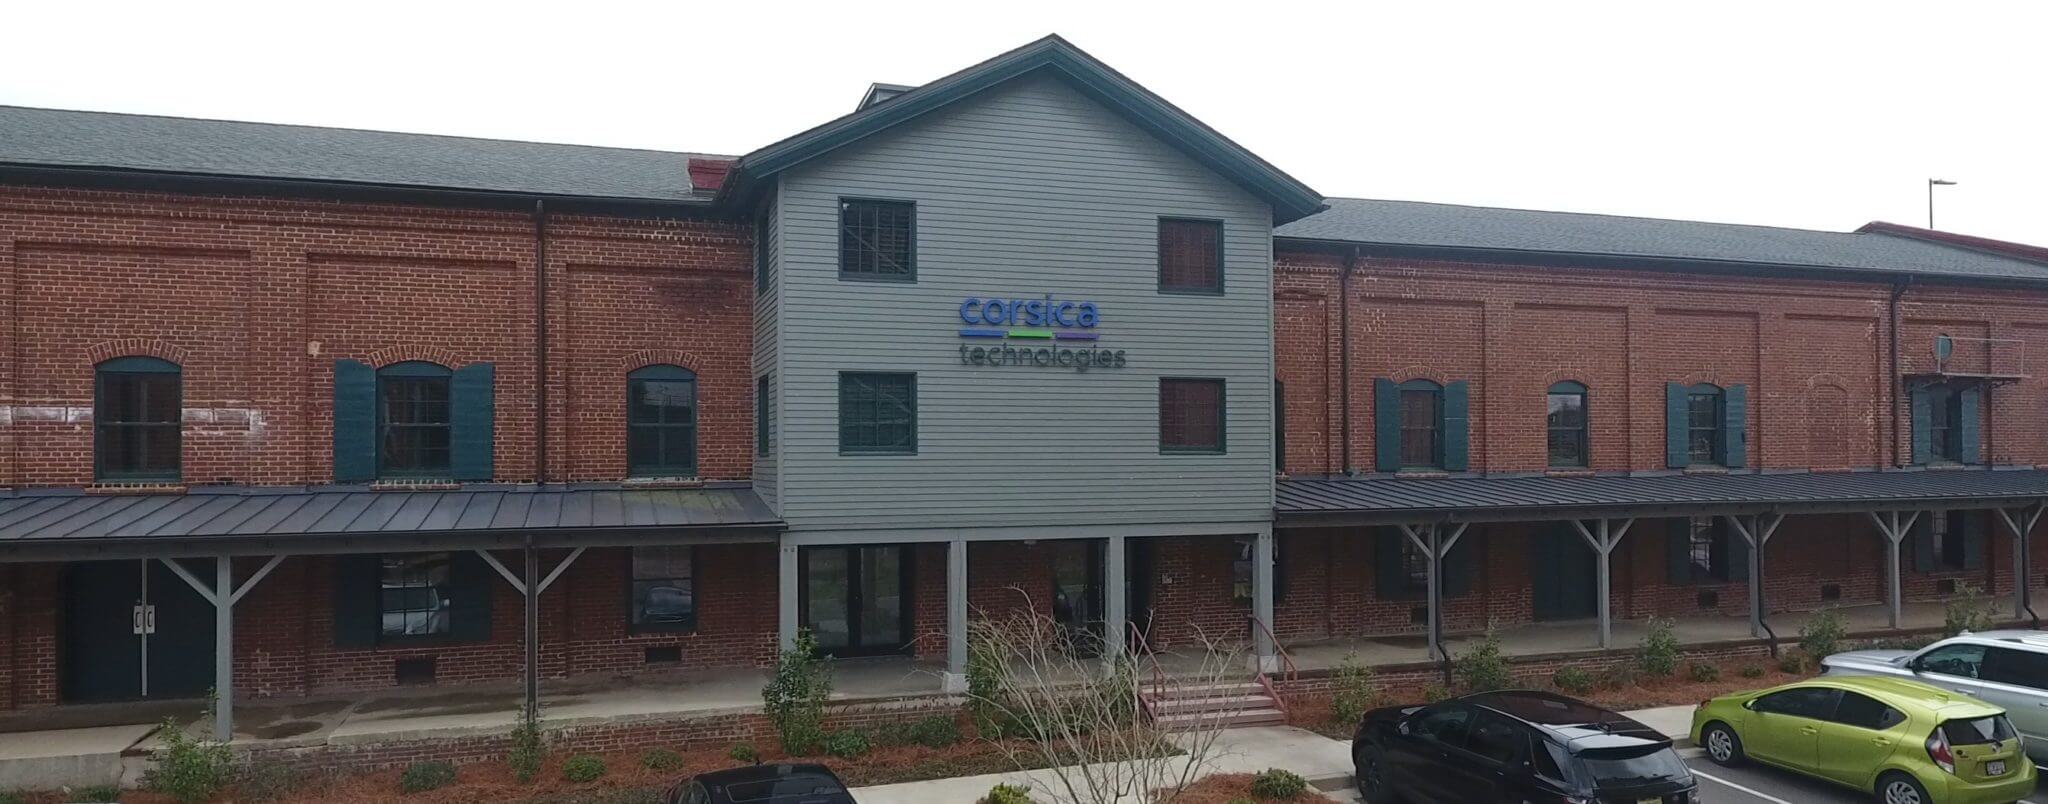 Outside view of the Corscia Technologies brick building.